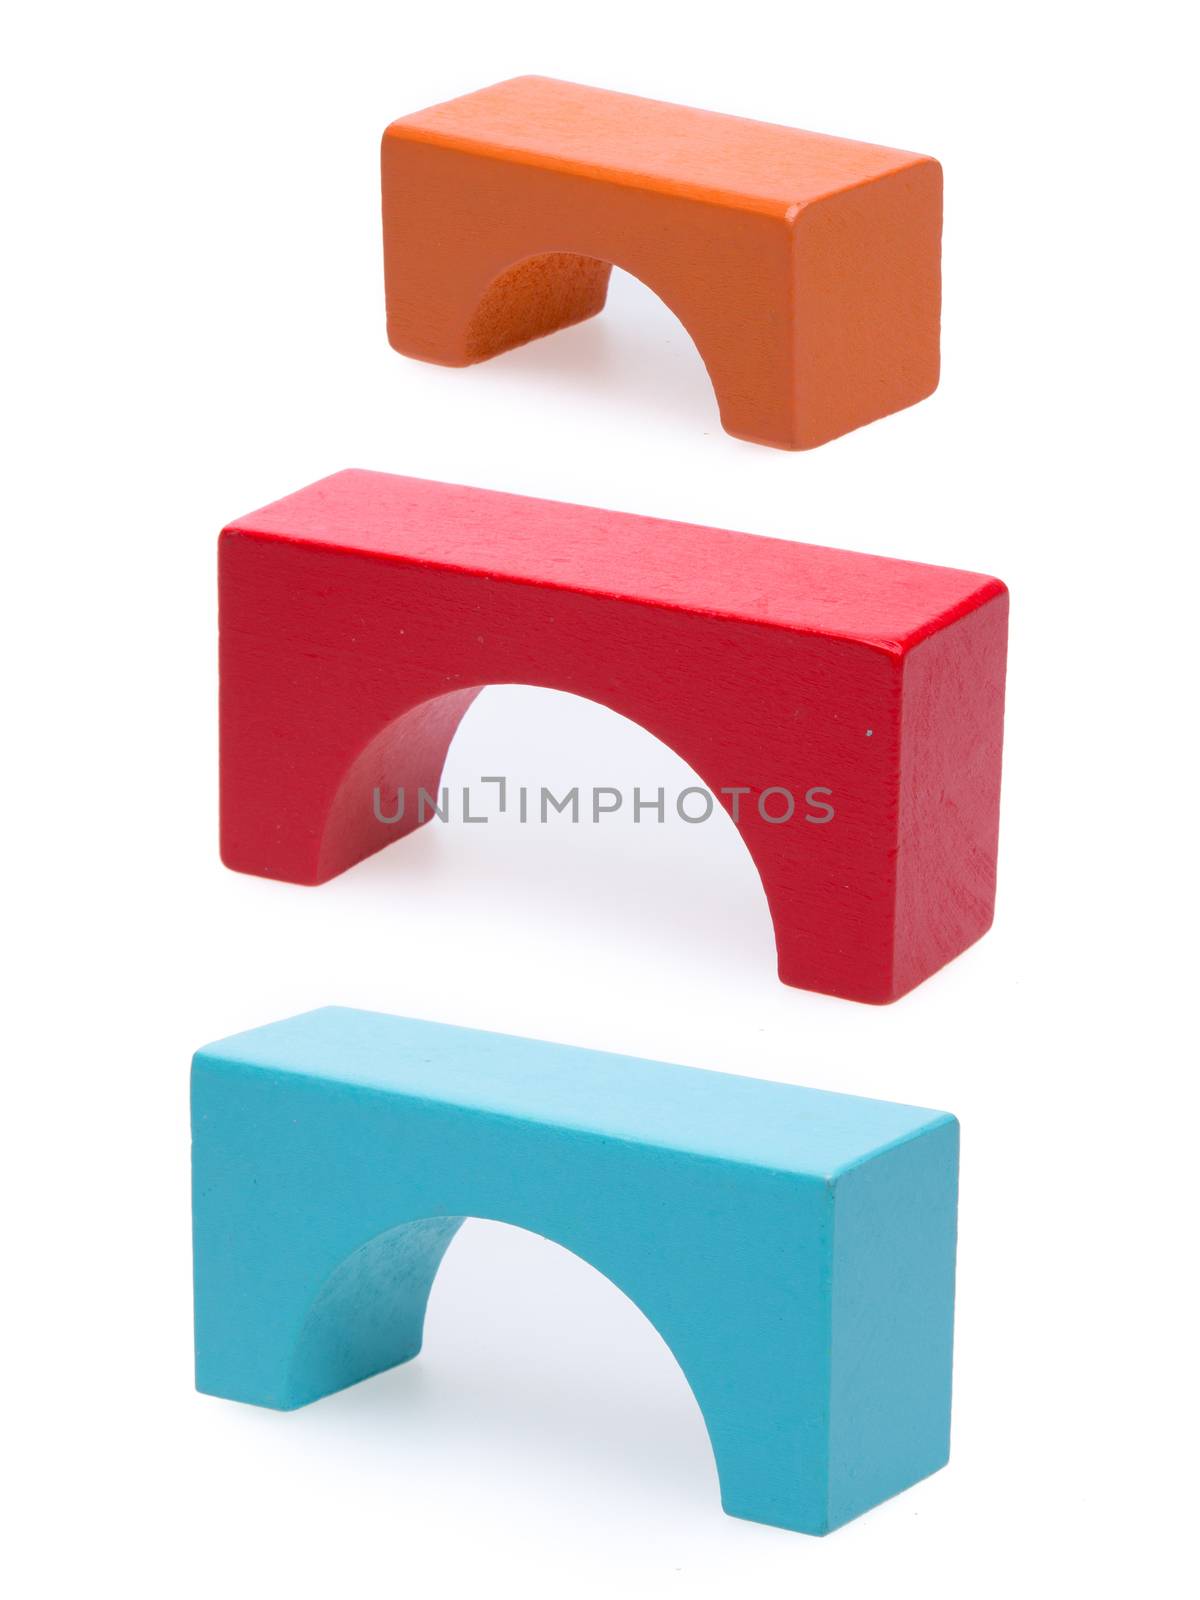 Wooden building blocks isolated on white background by tehcheesiong